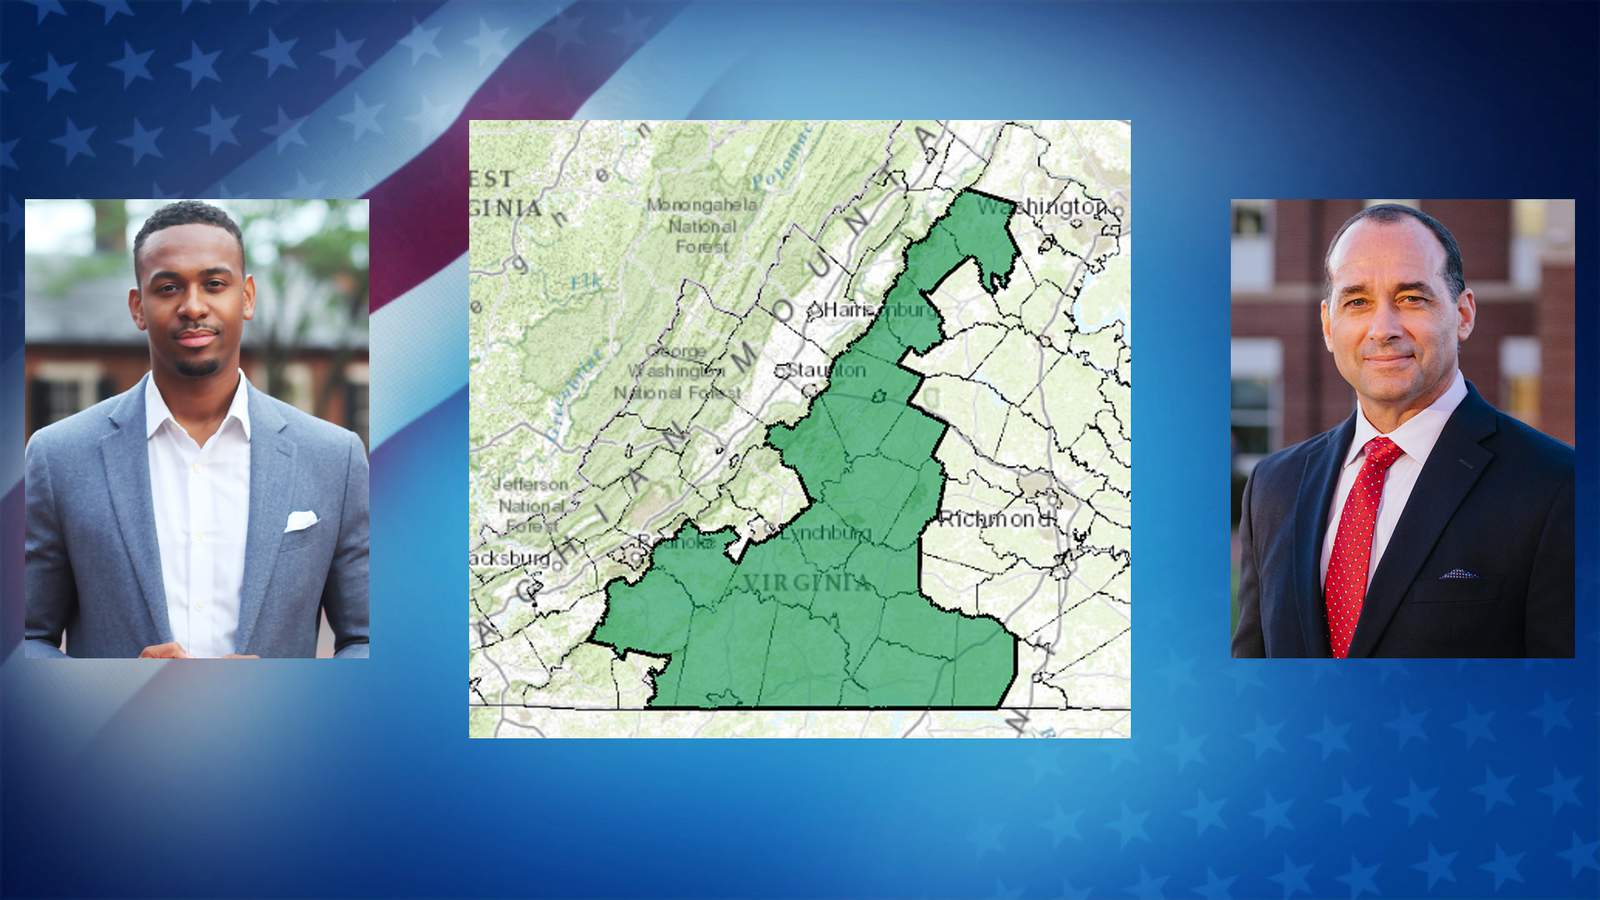 Results by locality for Virginia’s 5th Congressional District race between Webb and Good